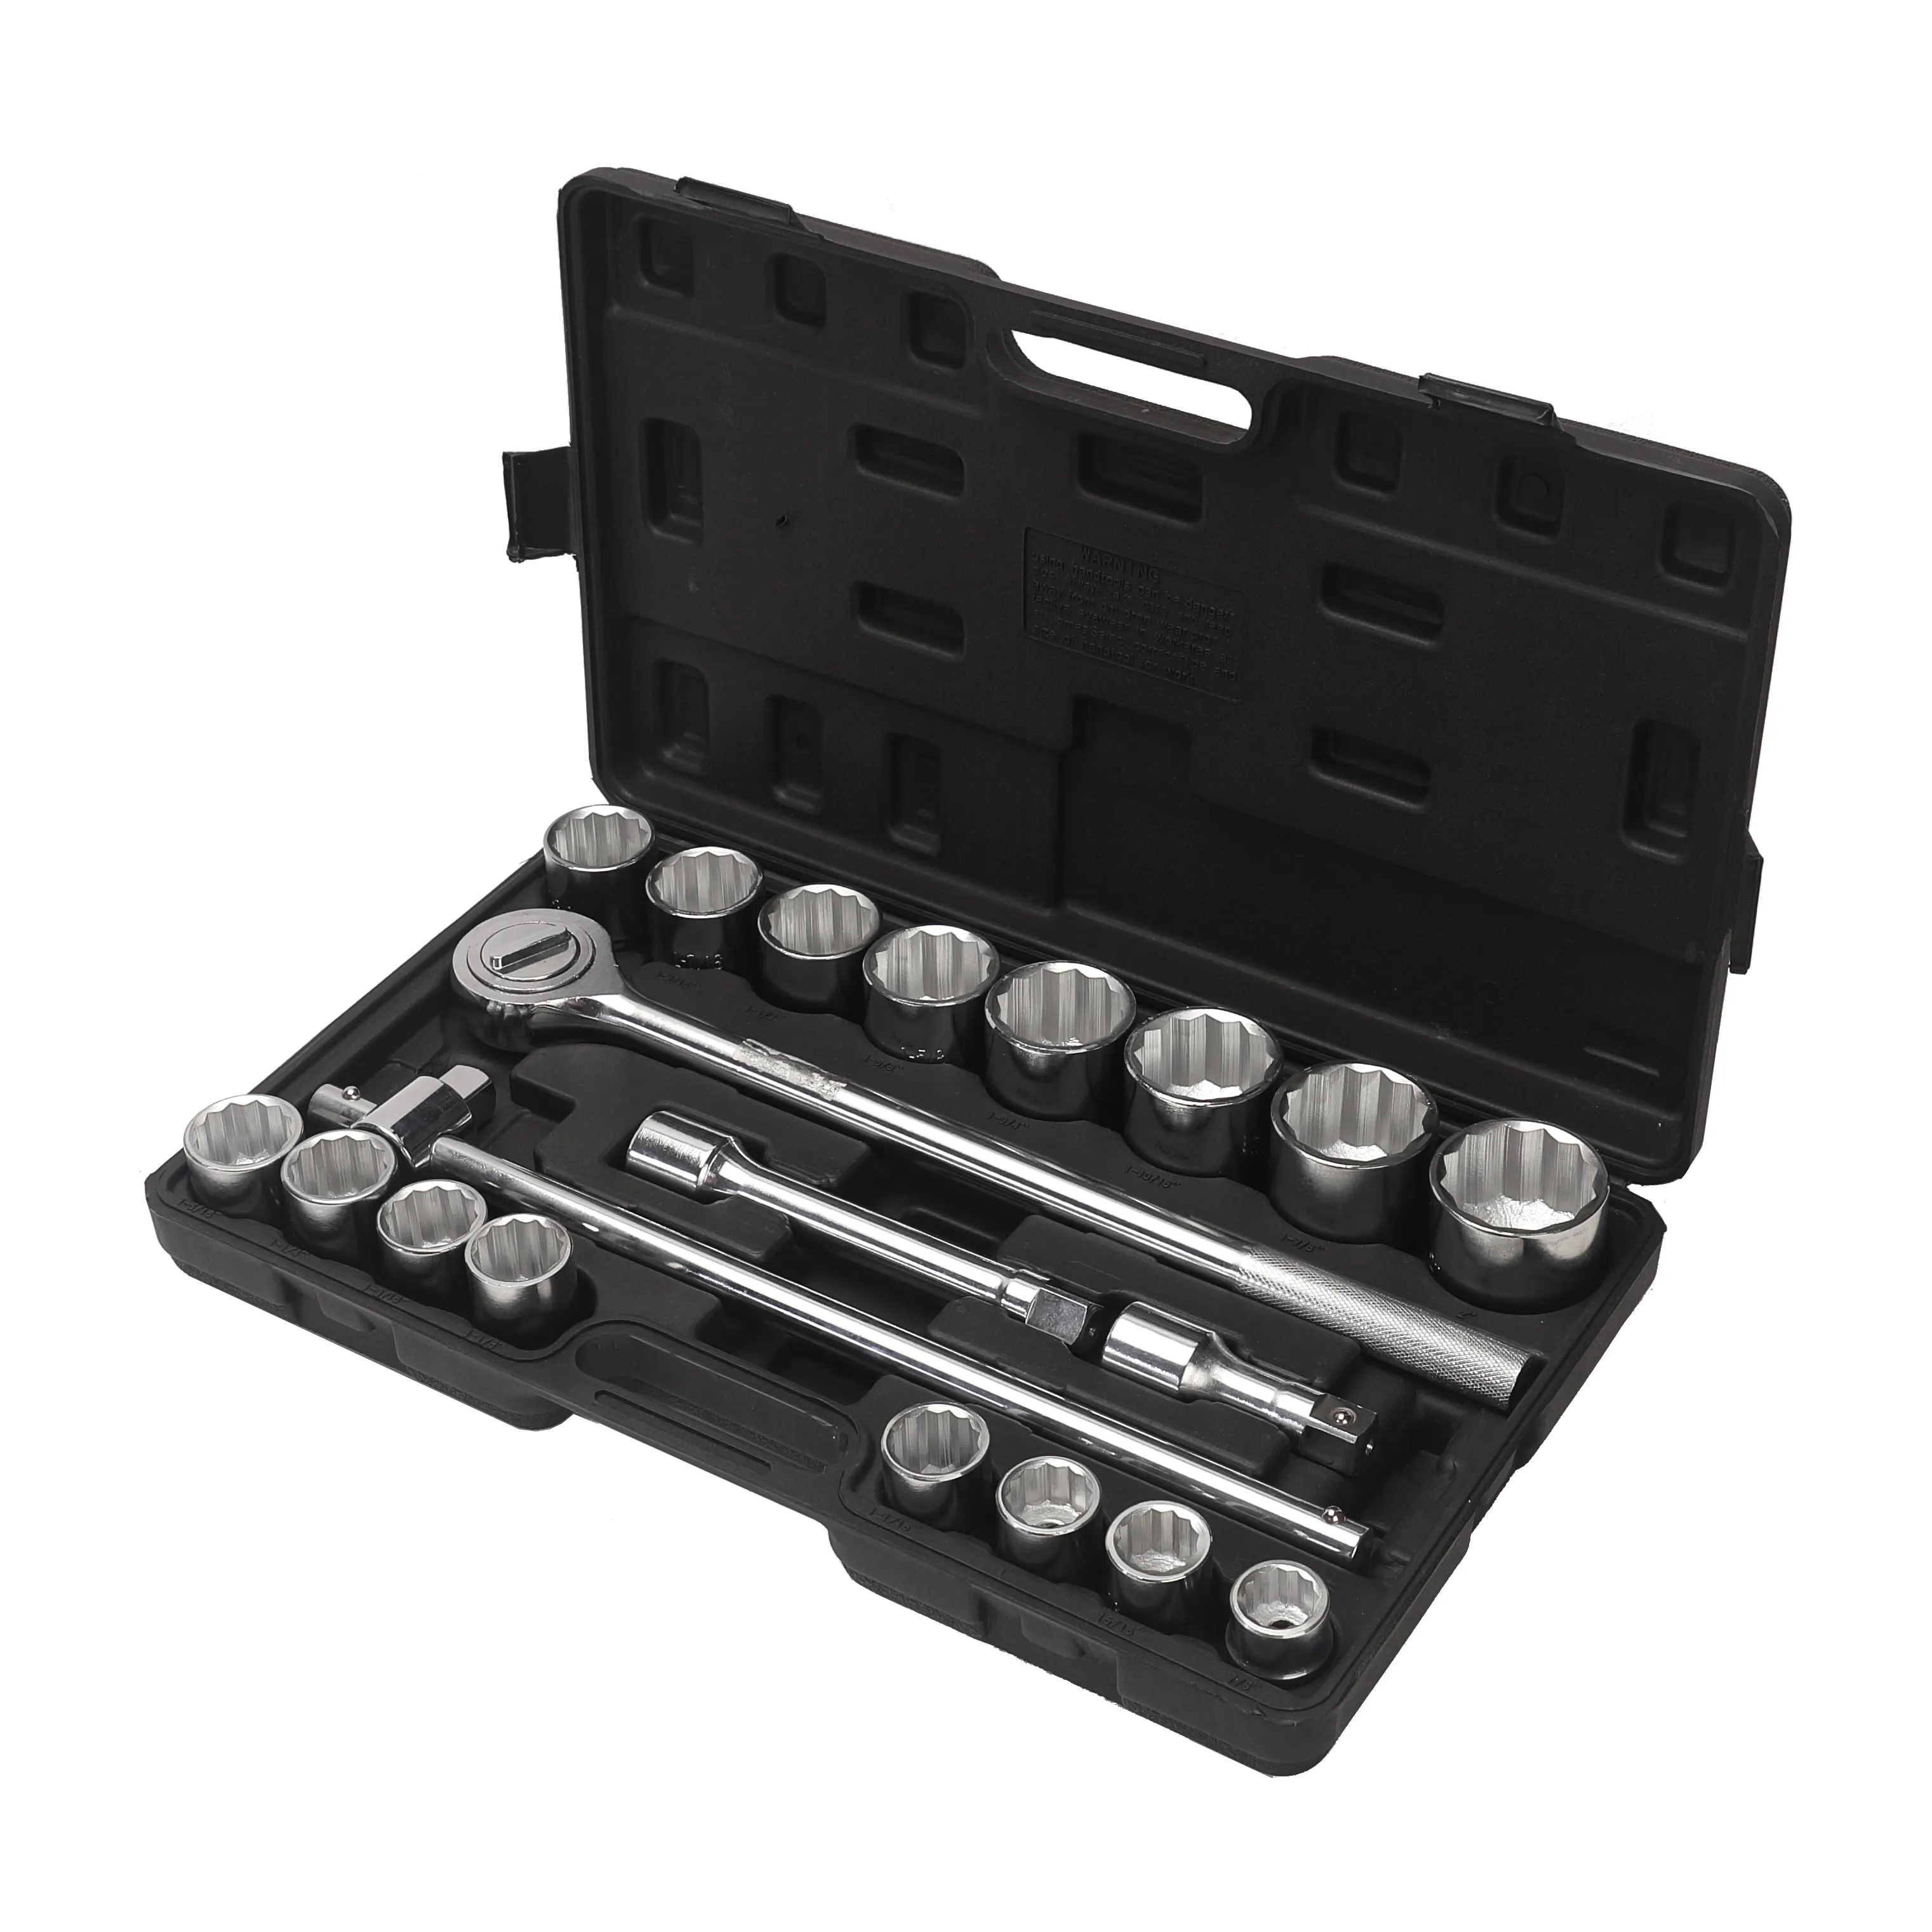 Manufacturer Heavy Duty Socket Wrench Tools Kit 21 pcs 3/4" Hardware Set For Truck Ship Repair and Industrial